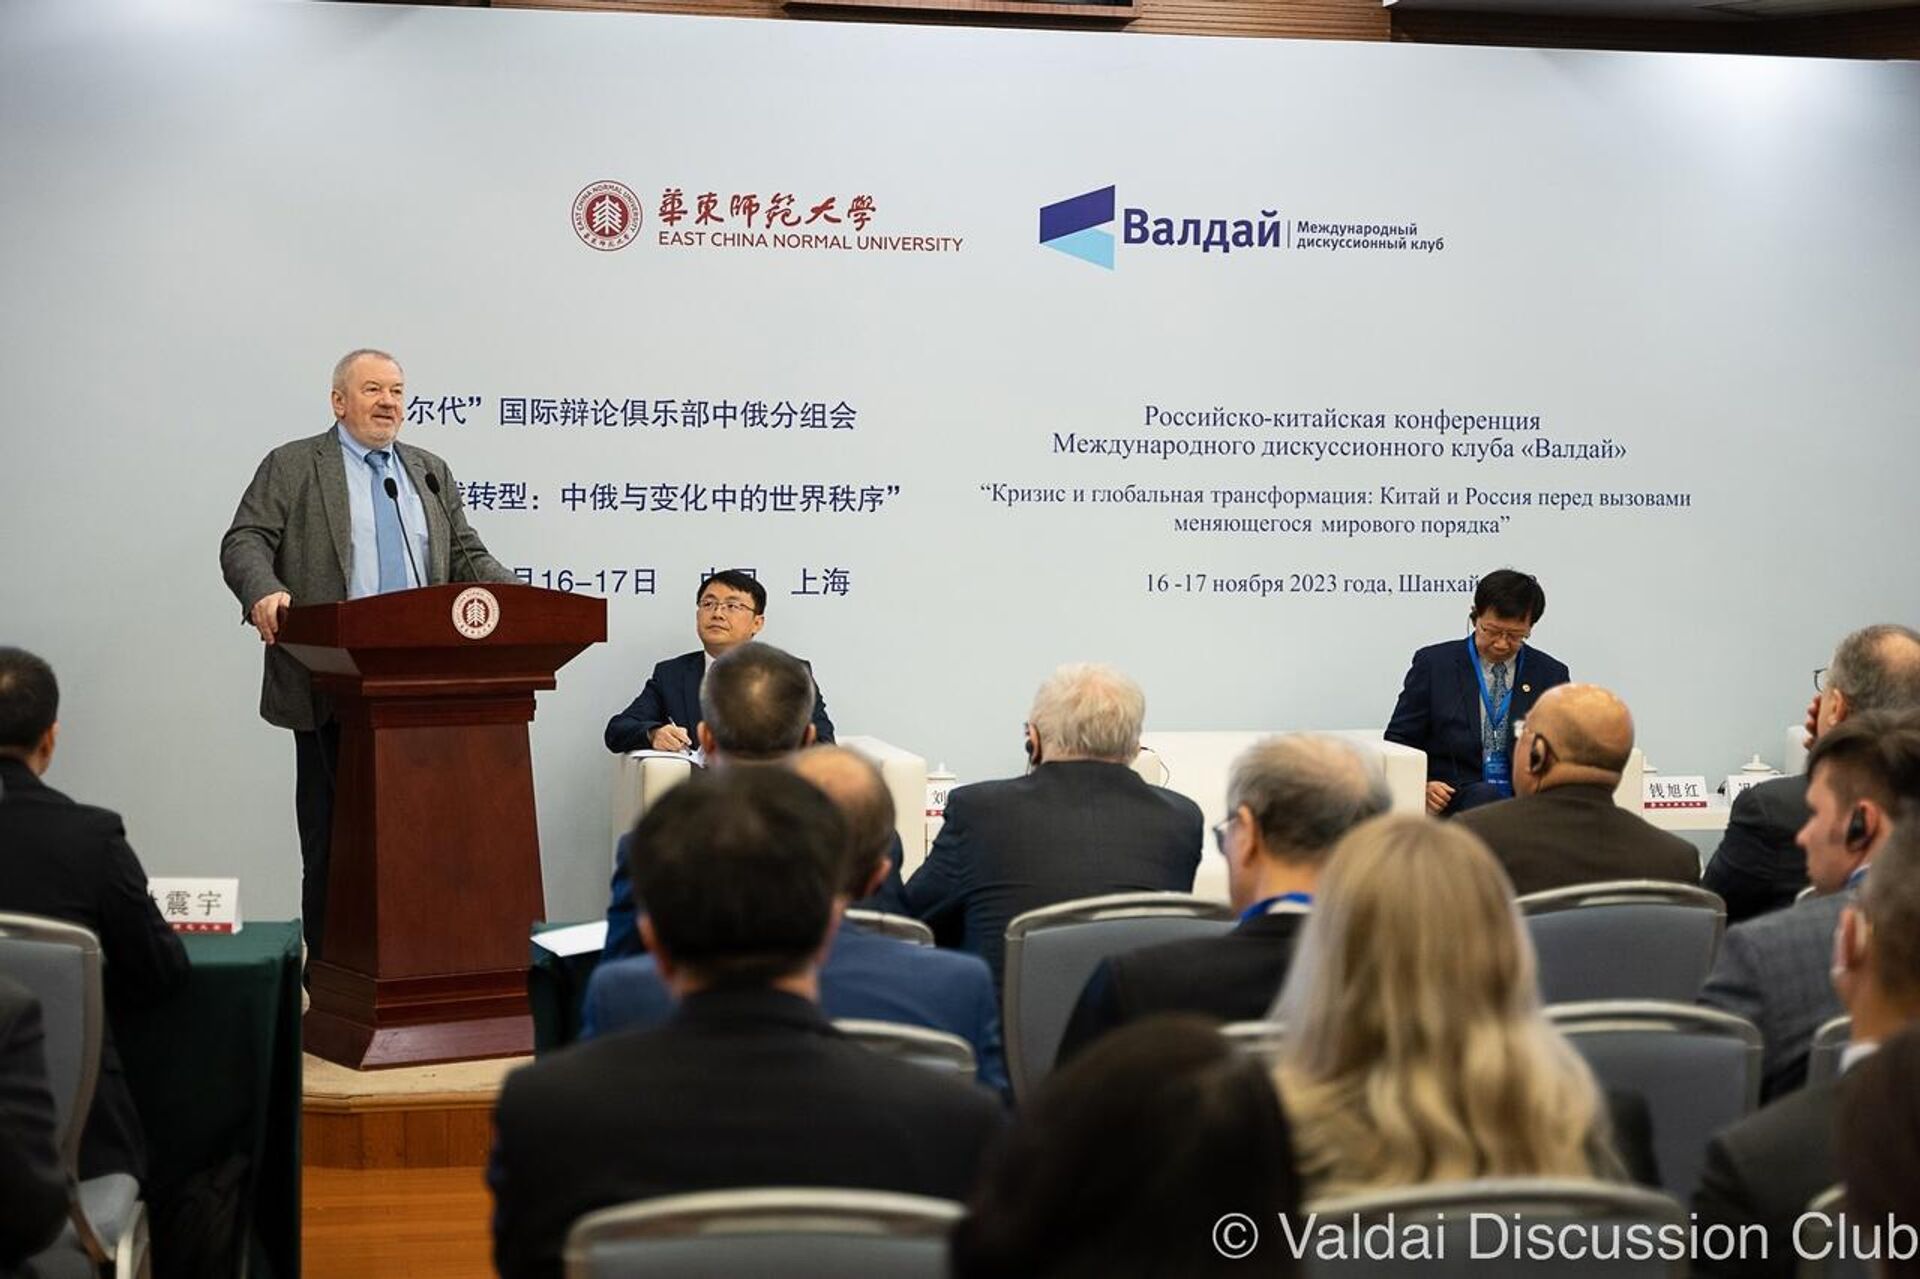 Professor Andrey Bystritsky, chairman of the Board of the Foundation for Development and Support of the Valdai Discussion Club, addresses the Shanghai-hosted Russian-Chinese conference. November 16, 2023. - Sputnik International, 1920, 16.11.2023